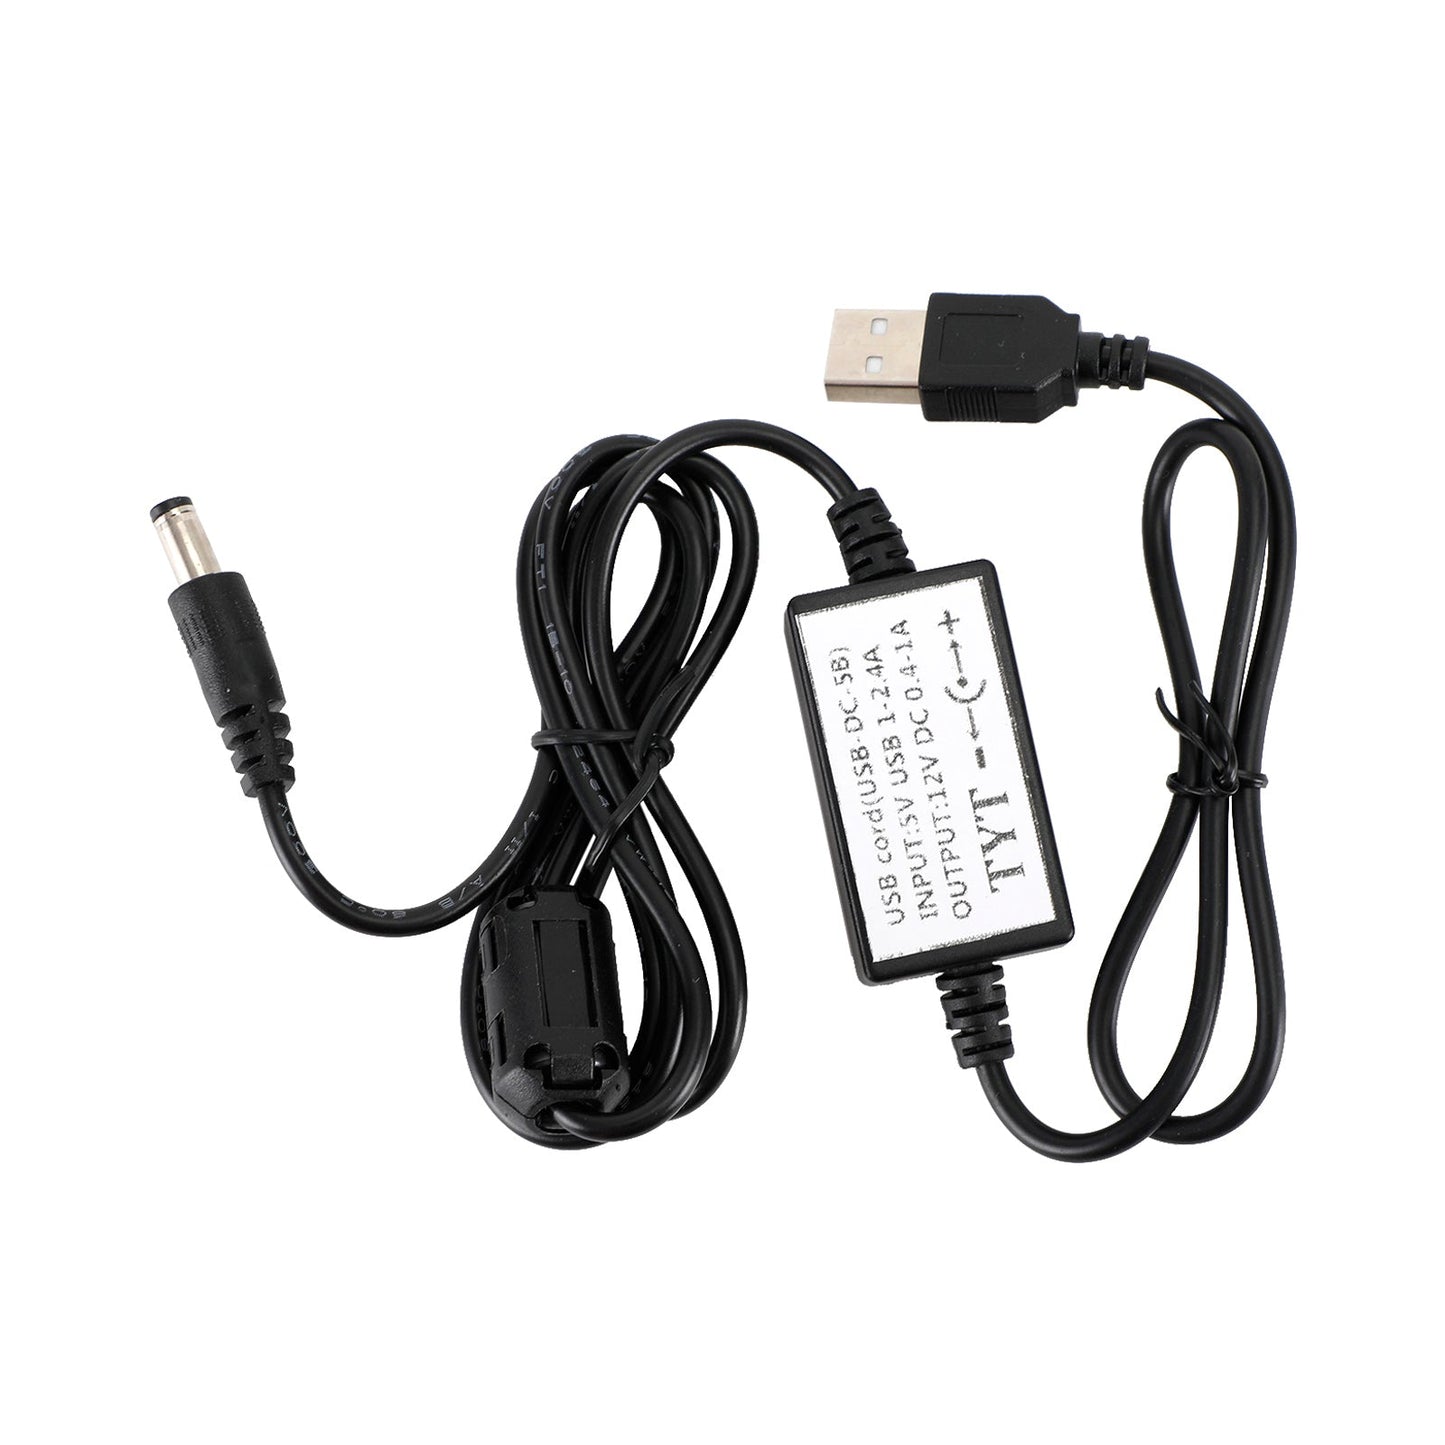 DC-5B USB Charger Cable Battery Charging Cord For TYT MD380 Radio Accessories